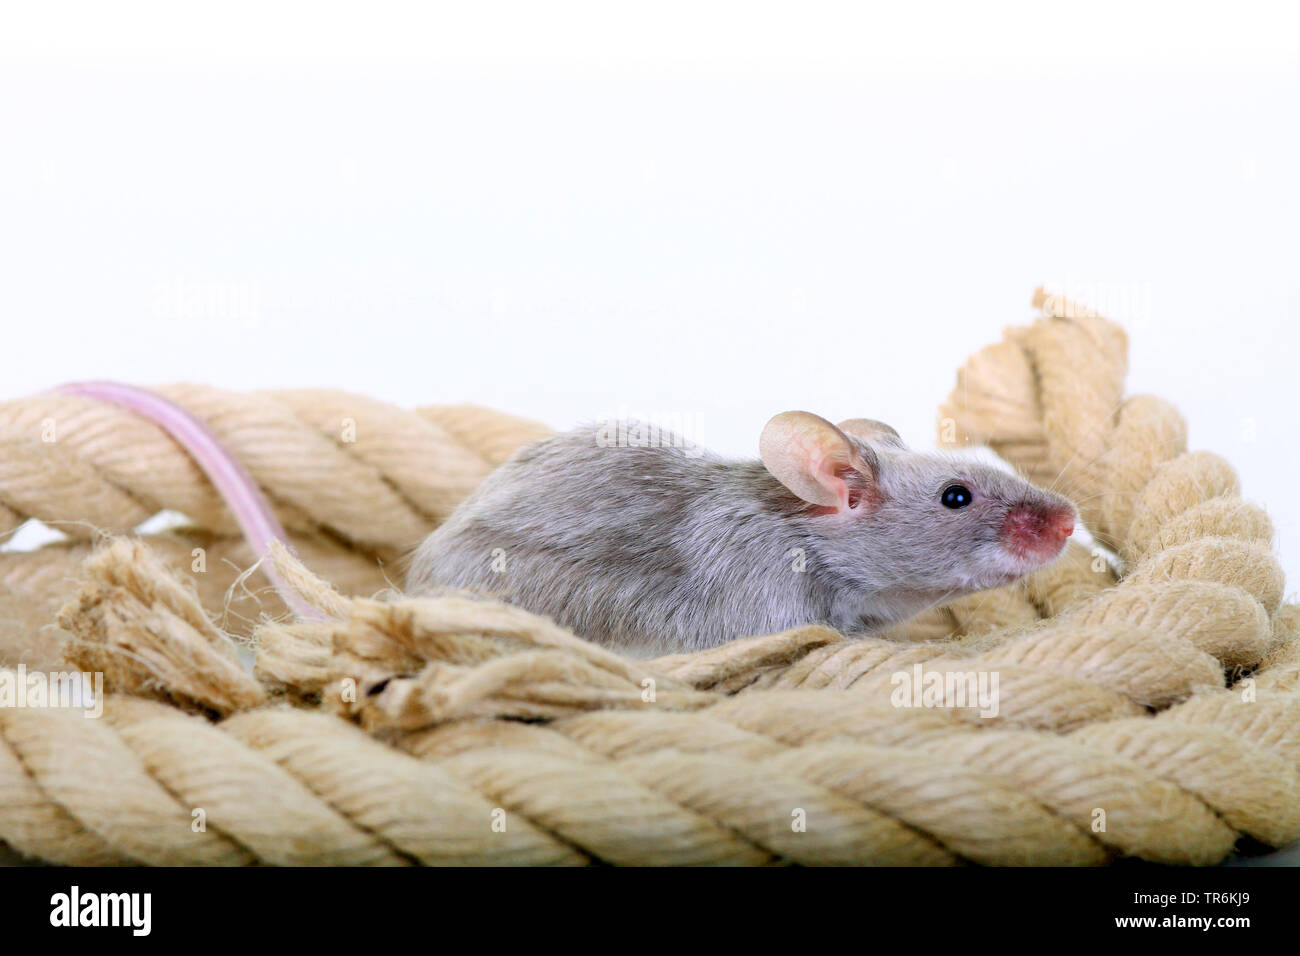 fancy mouse (Mus musculus), grey fancy mouse with rope, Germany Stock Photo